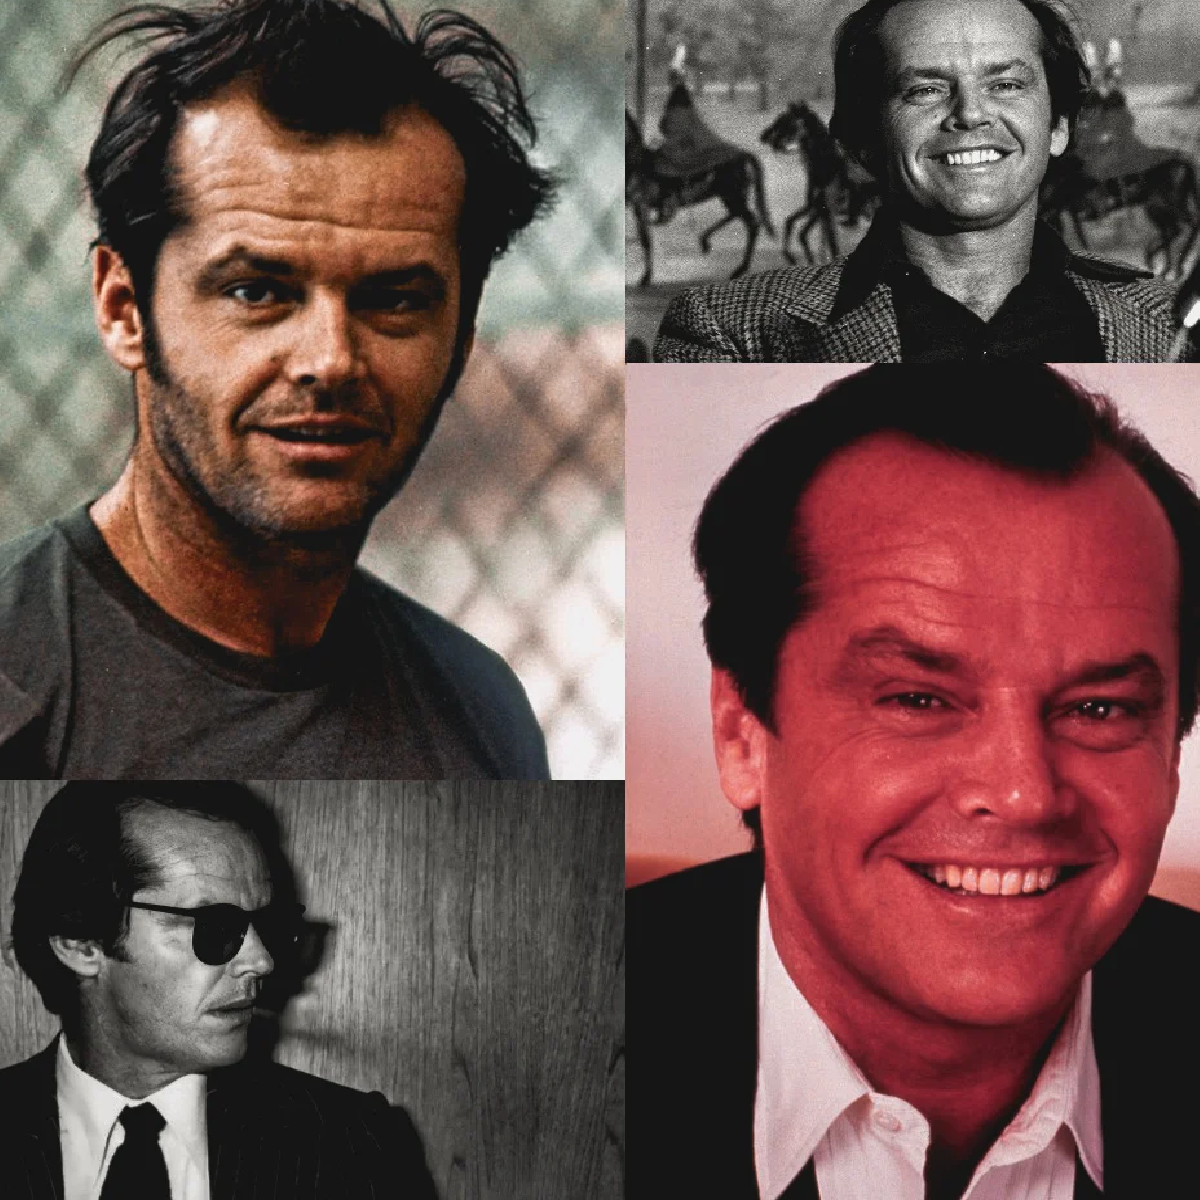 Nicholson's role is crazy characters.